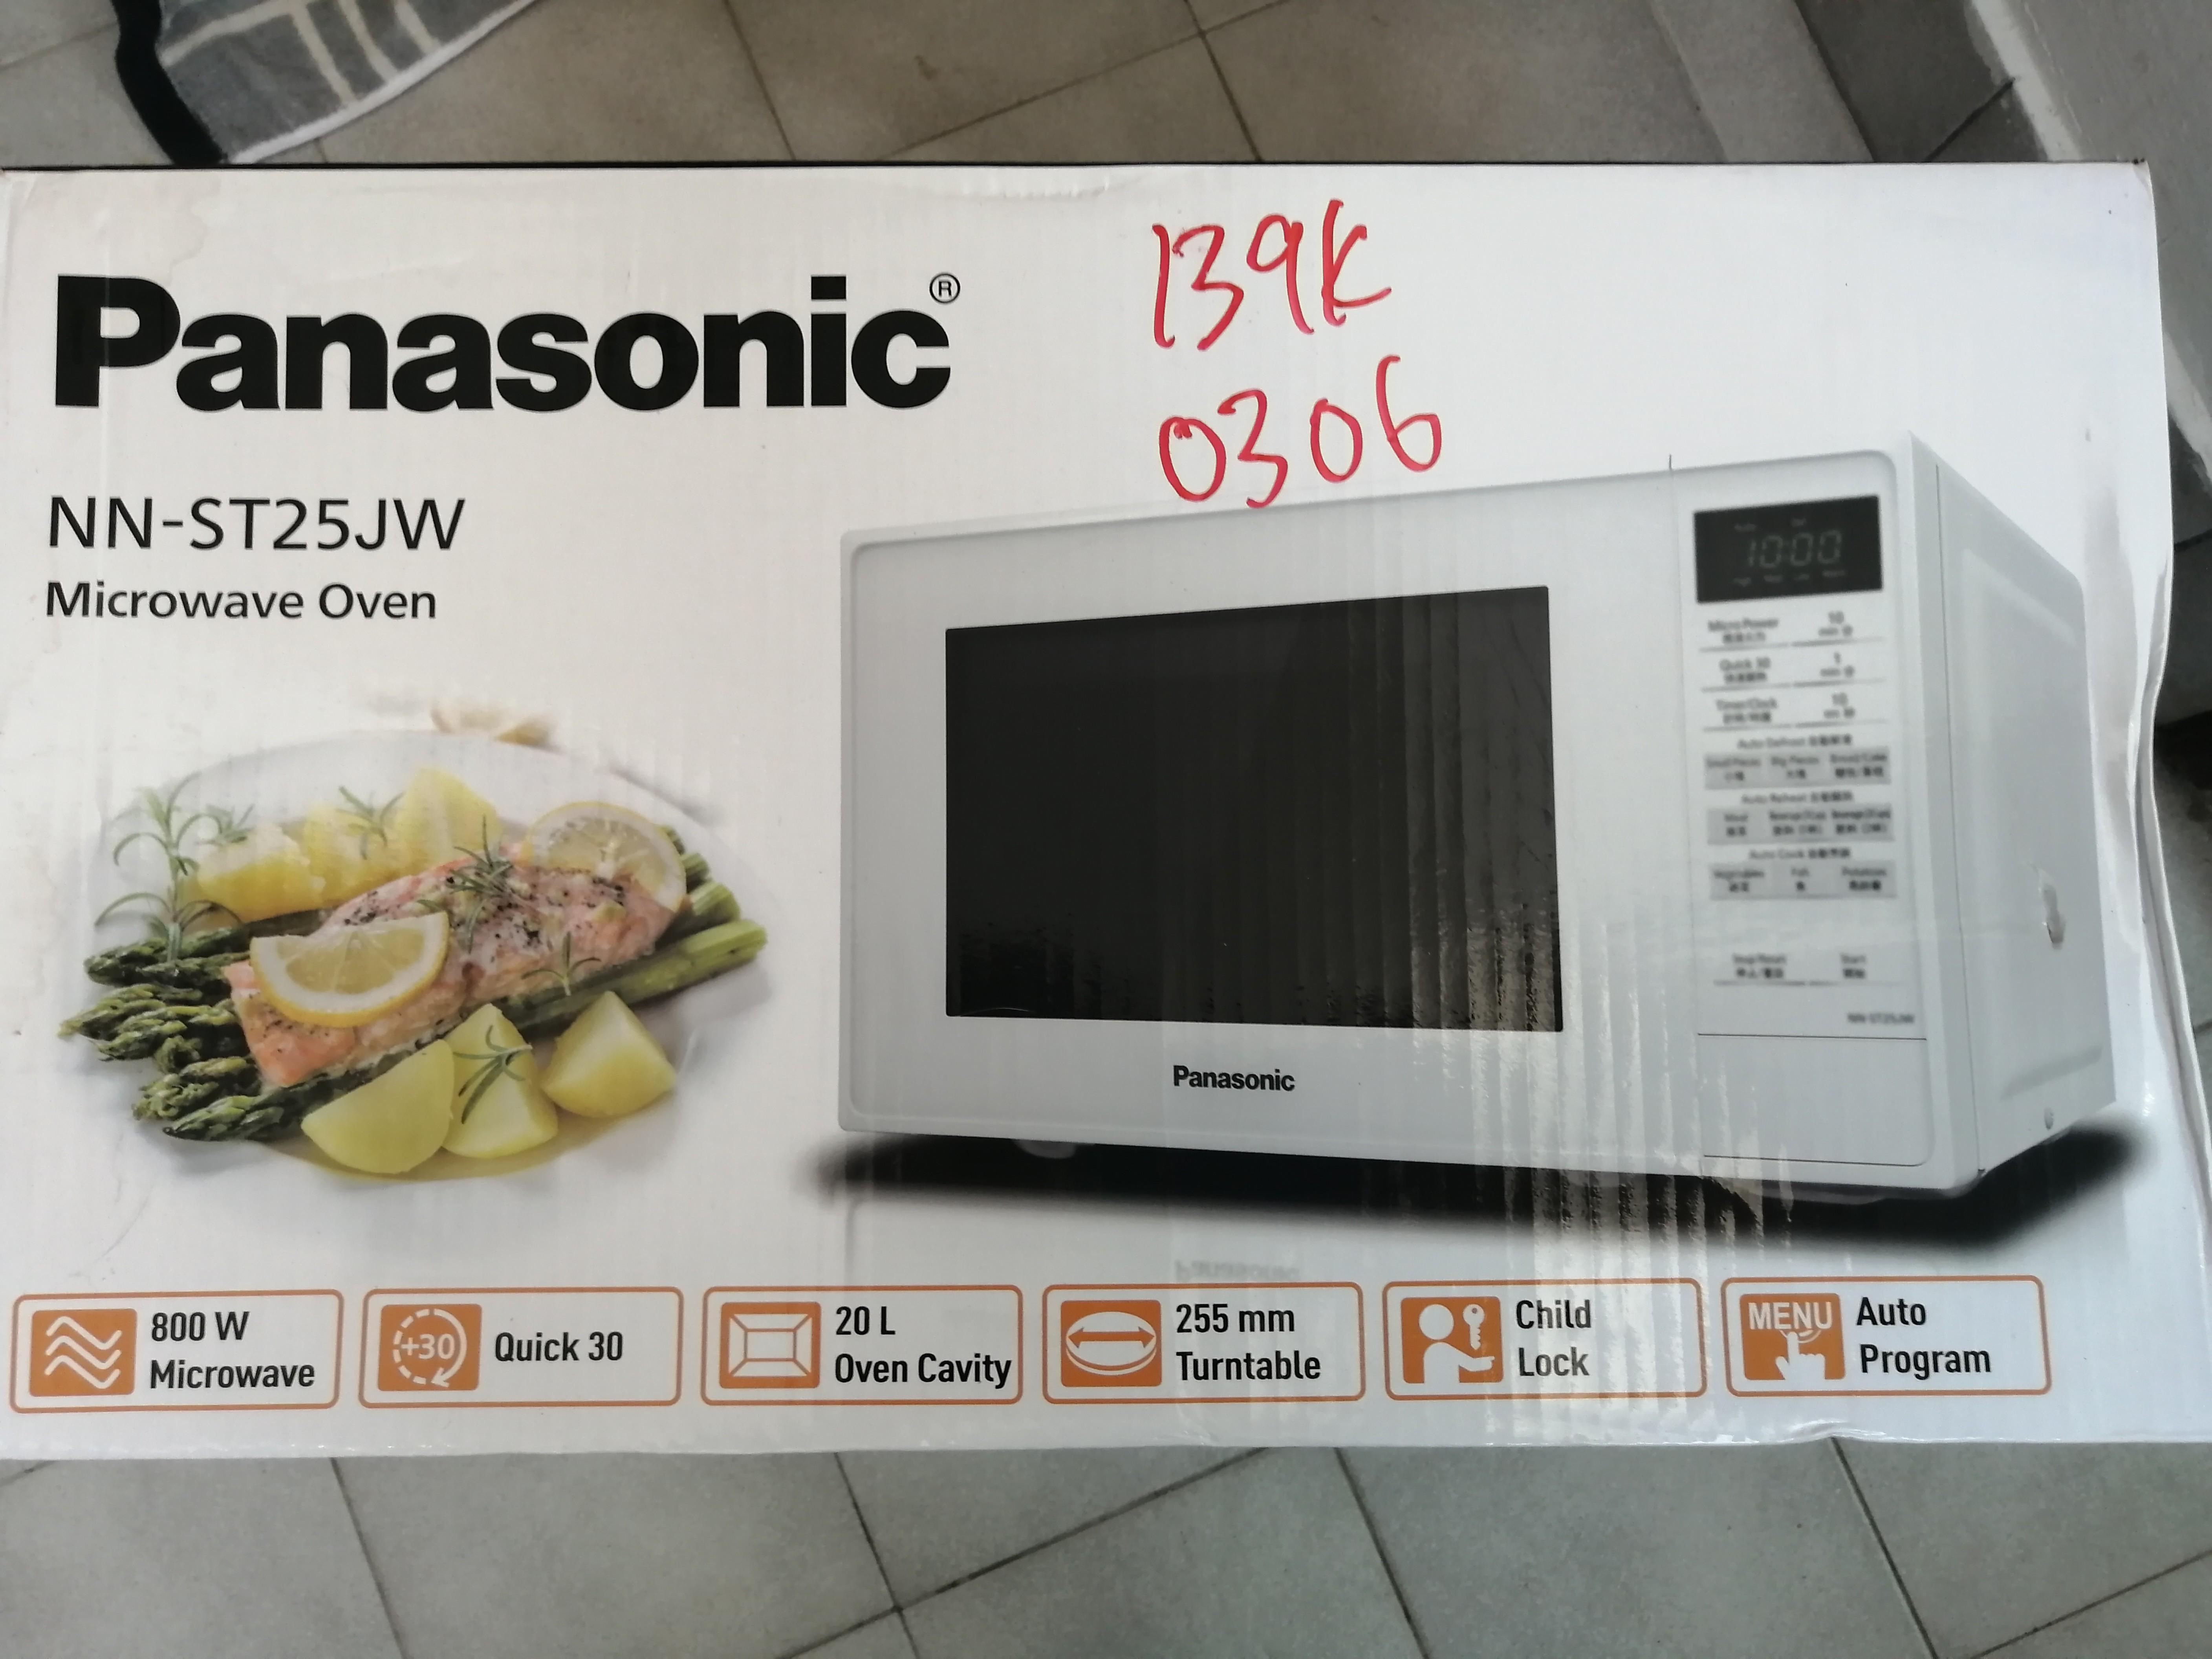 Panasonic Microwave Oven Home Appliances Kitchenware On Carousell